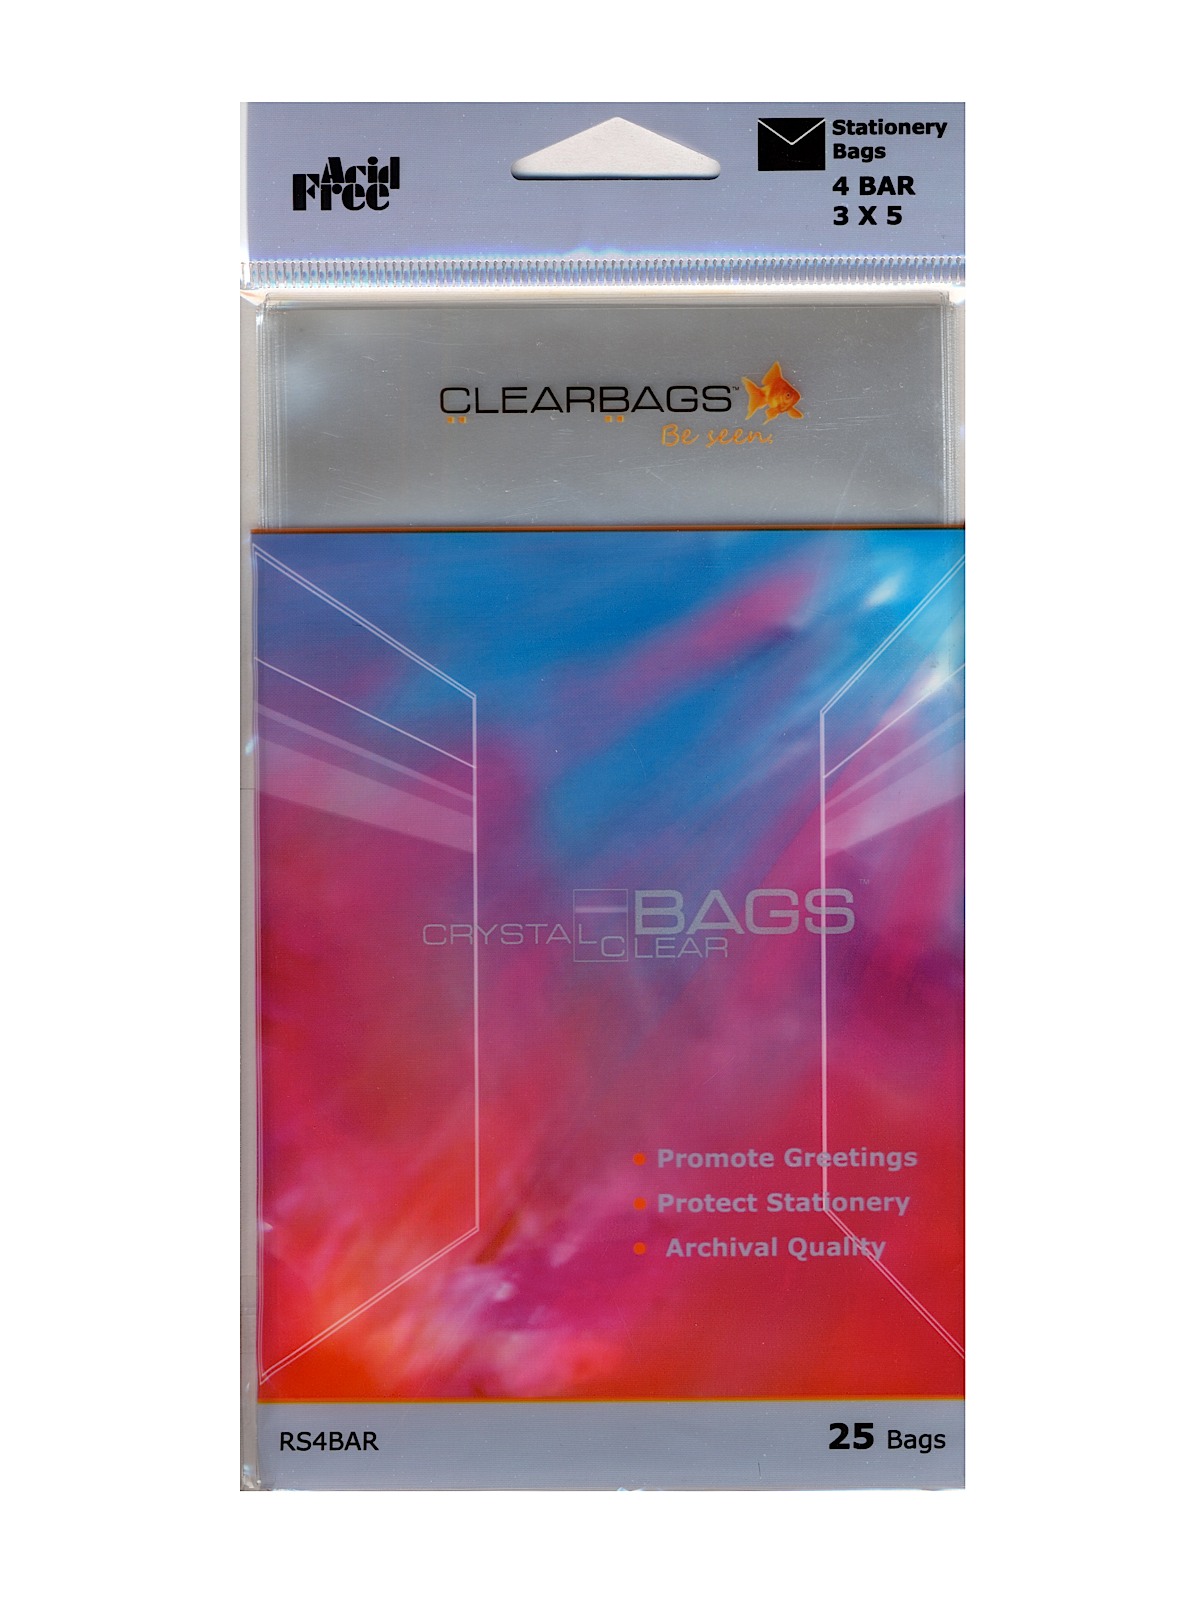 Impact Translucent Colored Plastic Envelopes 3 13 16 In. X 5 3 16 In. Clear Pack Of 25